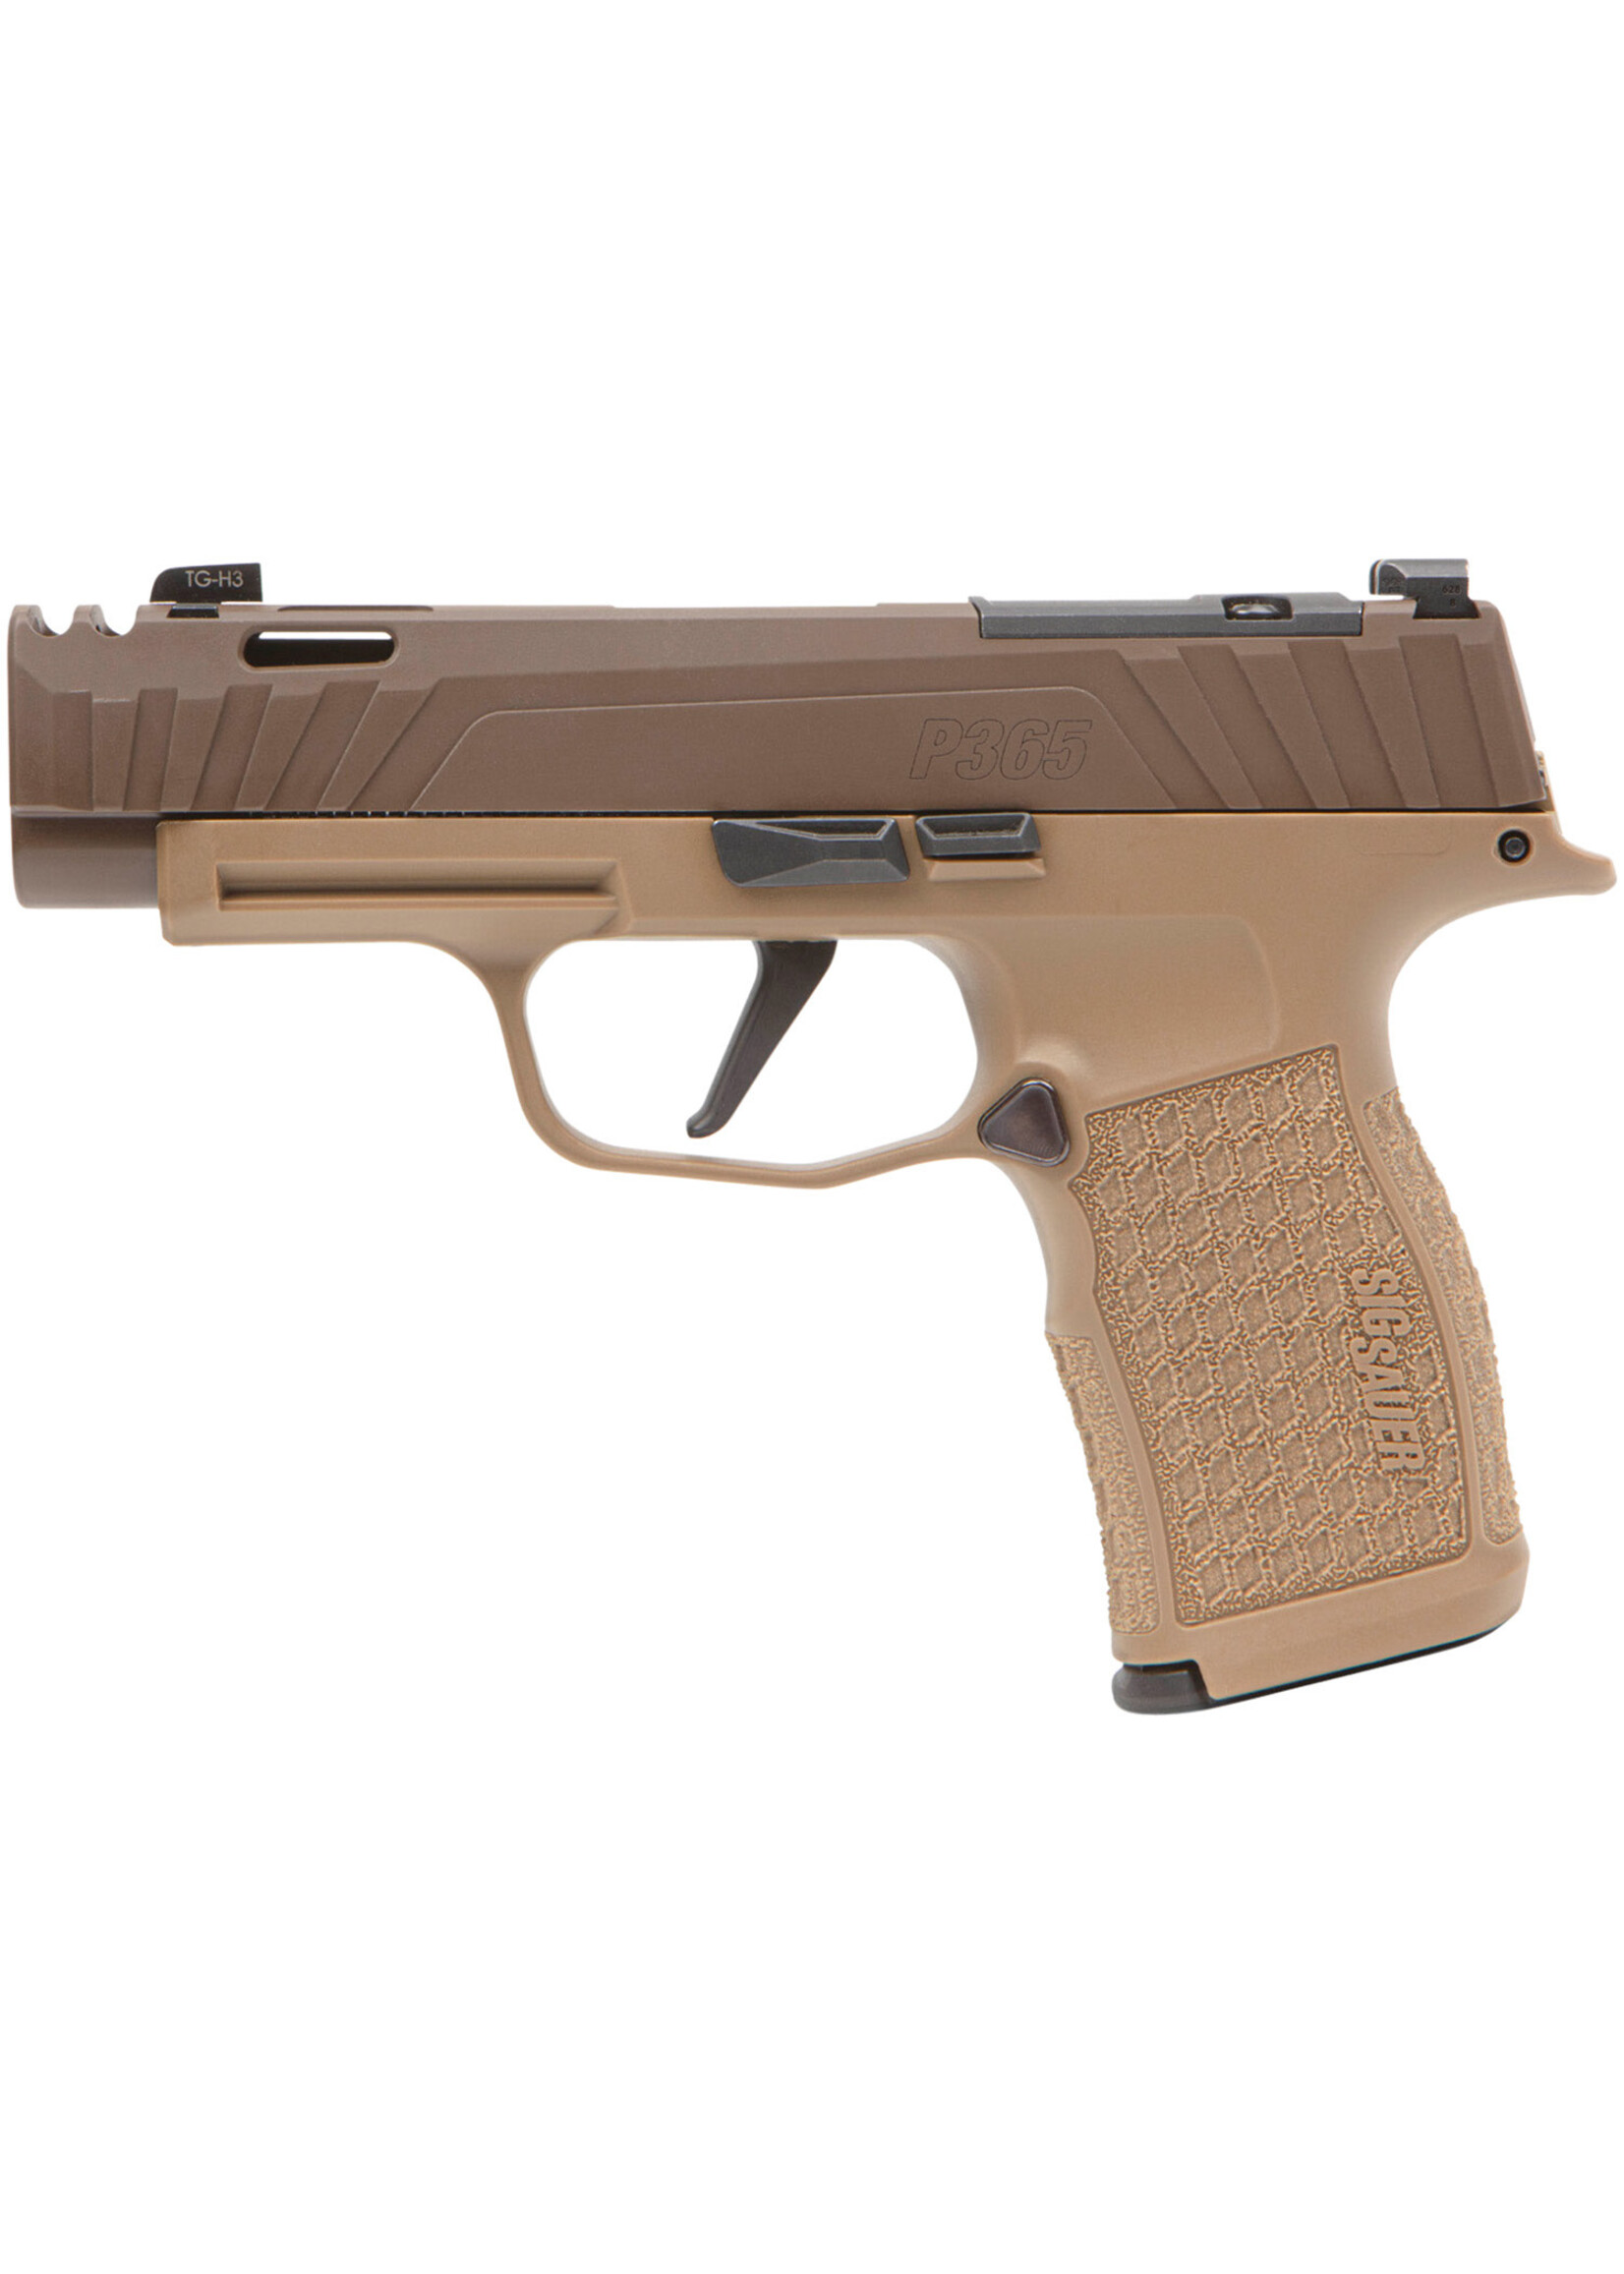 Sig Sauer SPECIAL ORDER Sig Sauer P365V005 P365XL Spectre Comp Full Size 9mm Luger 12+1/17+1 3.10" Black Nitride Carbon Steel Barrel, Coyote Cerakote Integrally Compensated/Optic Ready/Serrated Slide, Coyote Tan Stainless Steel Frame w/Picatinny Rail Coyote